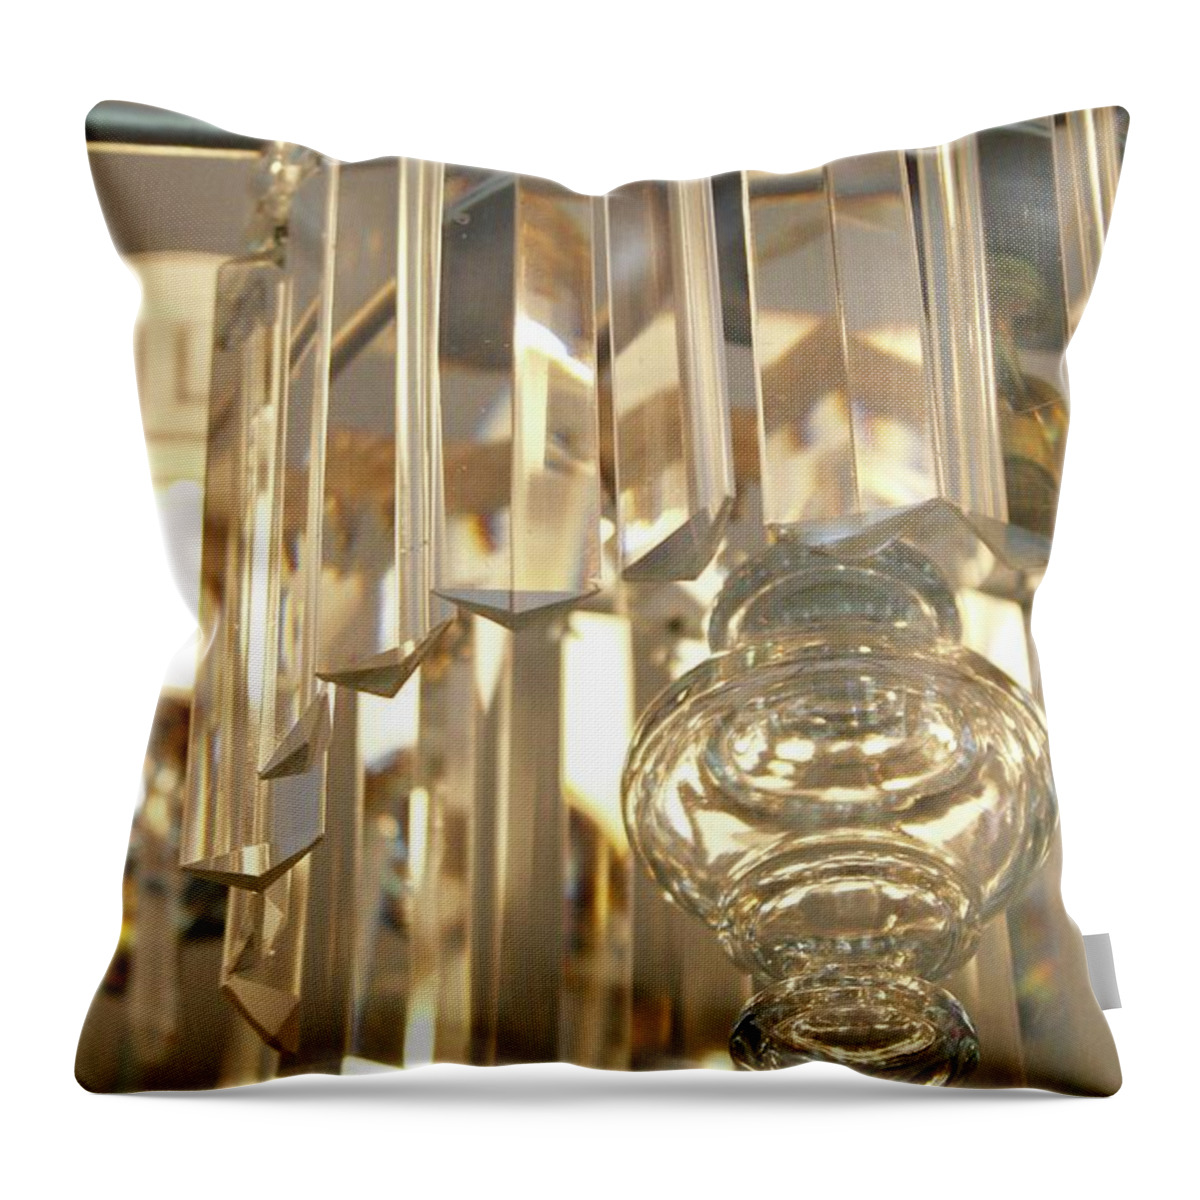 Chandelier Throw Pillow featuring the photograph Chandelier III by Flavia Westerwelle